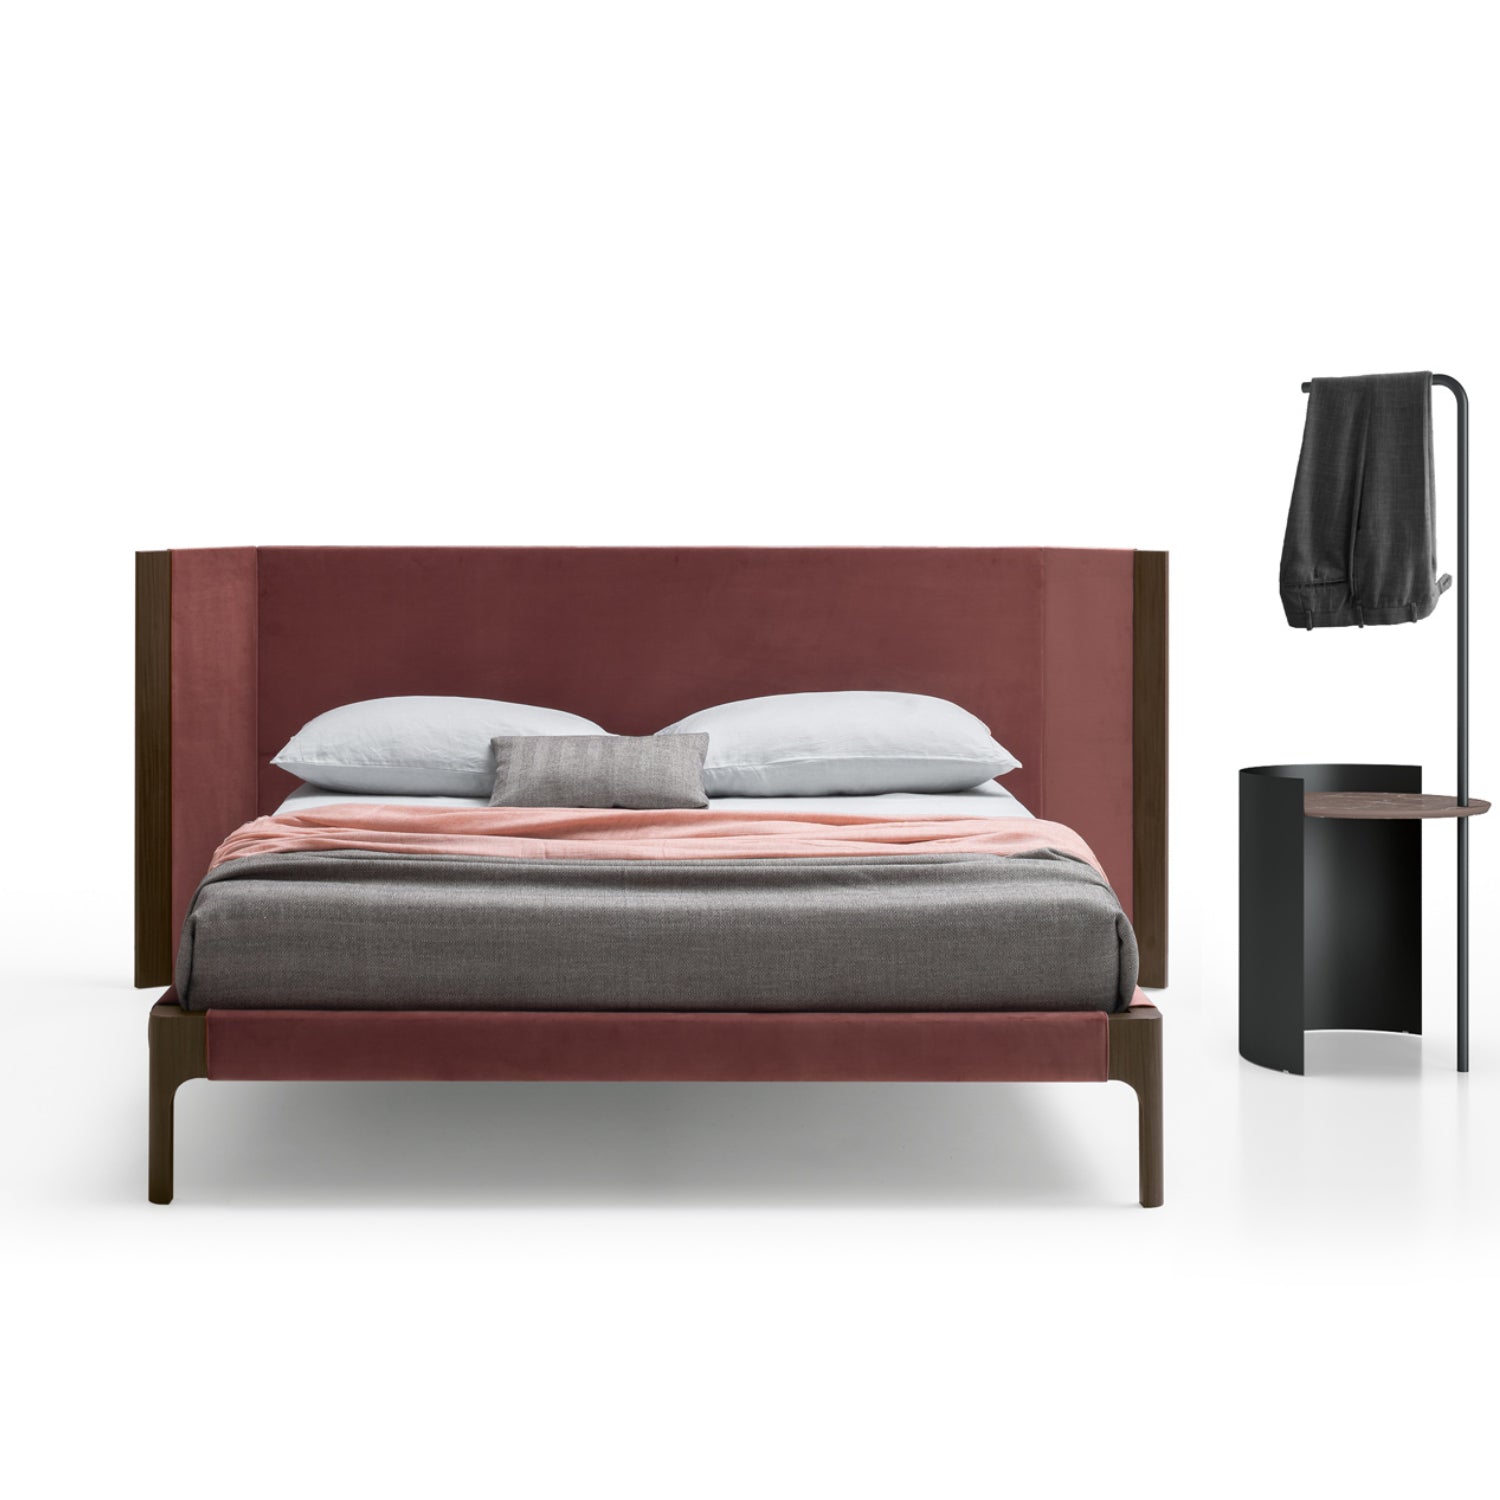 Maistro upholstered Bed by Santa Lucia